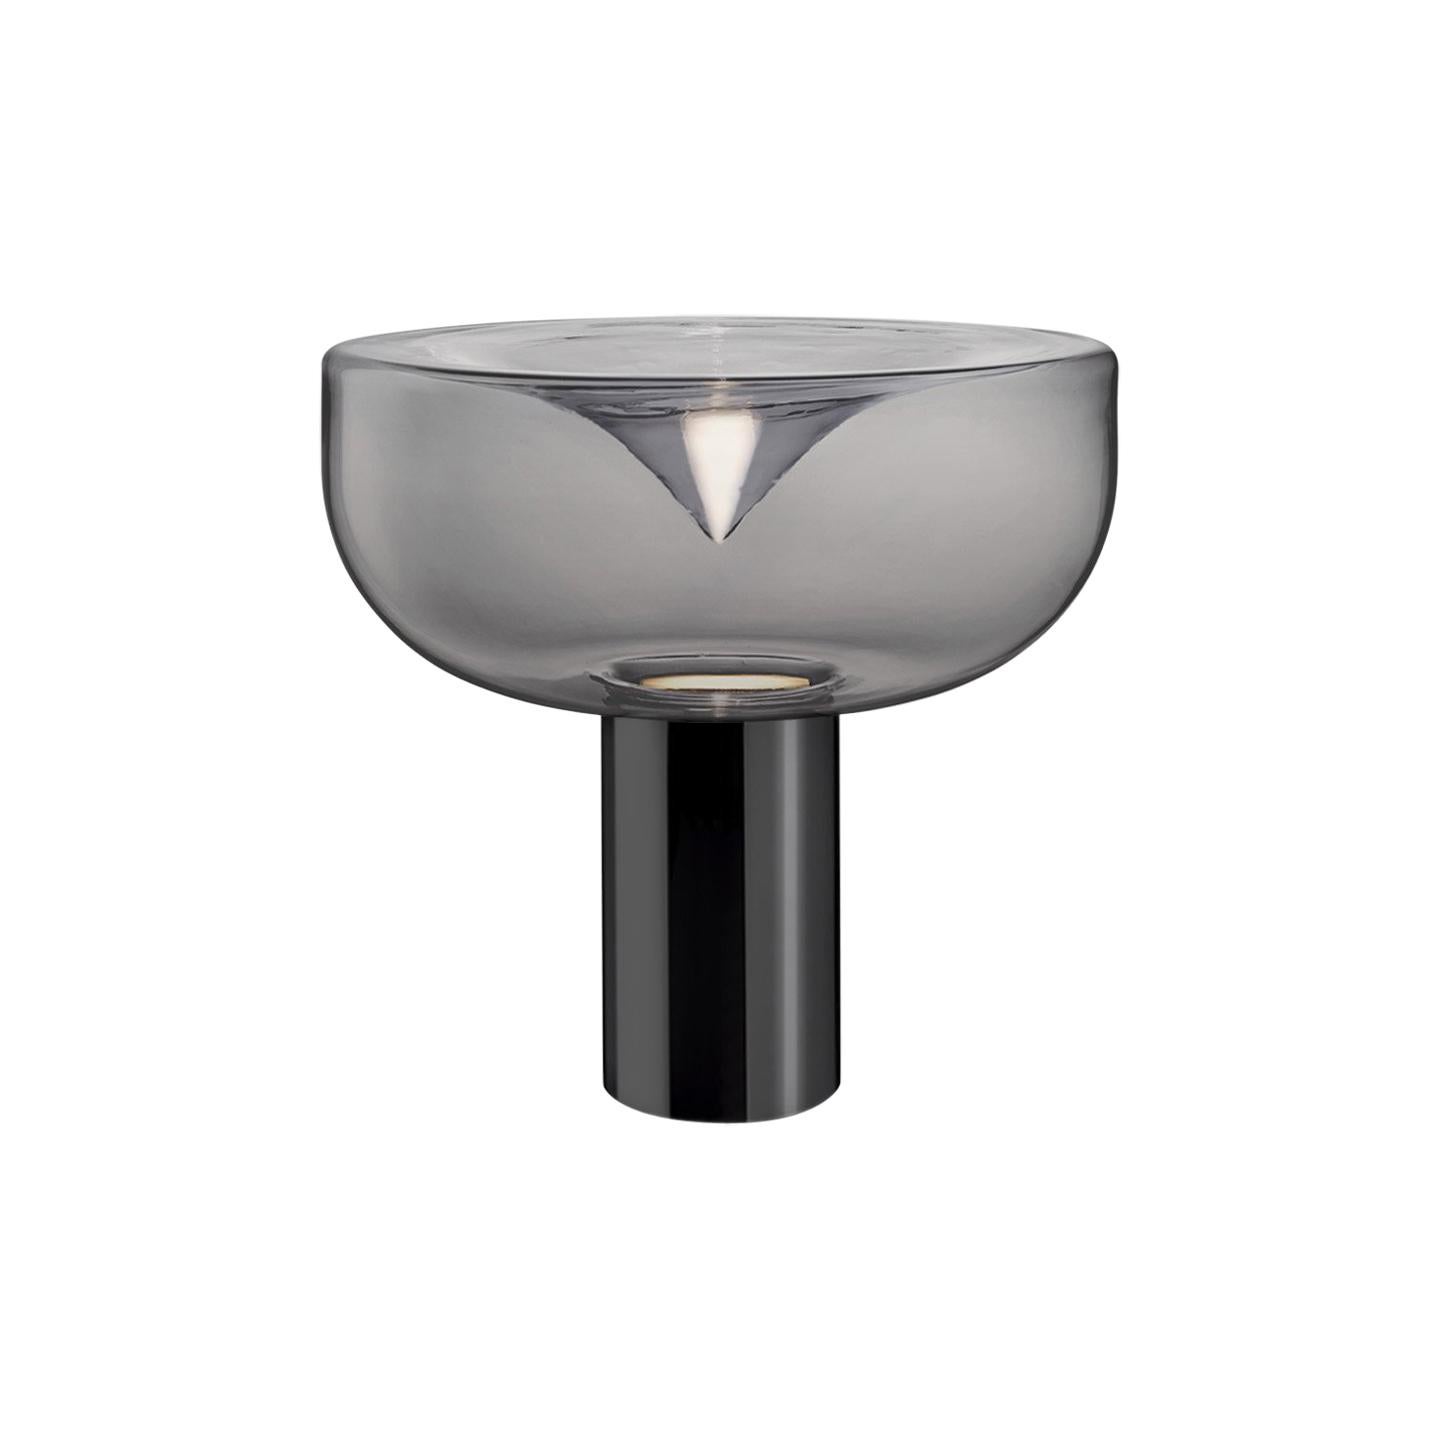 Leucos Aella 1968 T LED Table Light in Smoke Gray and Gunmetal by Toso & Massari For Sale